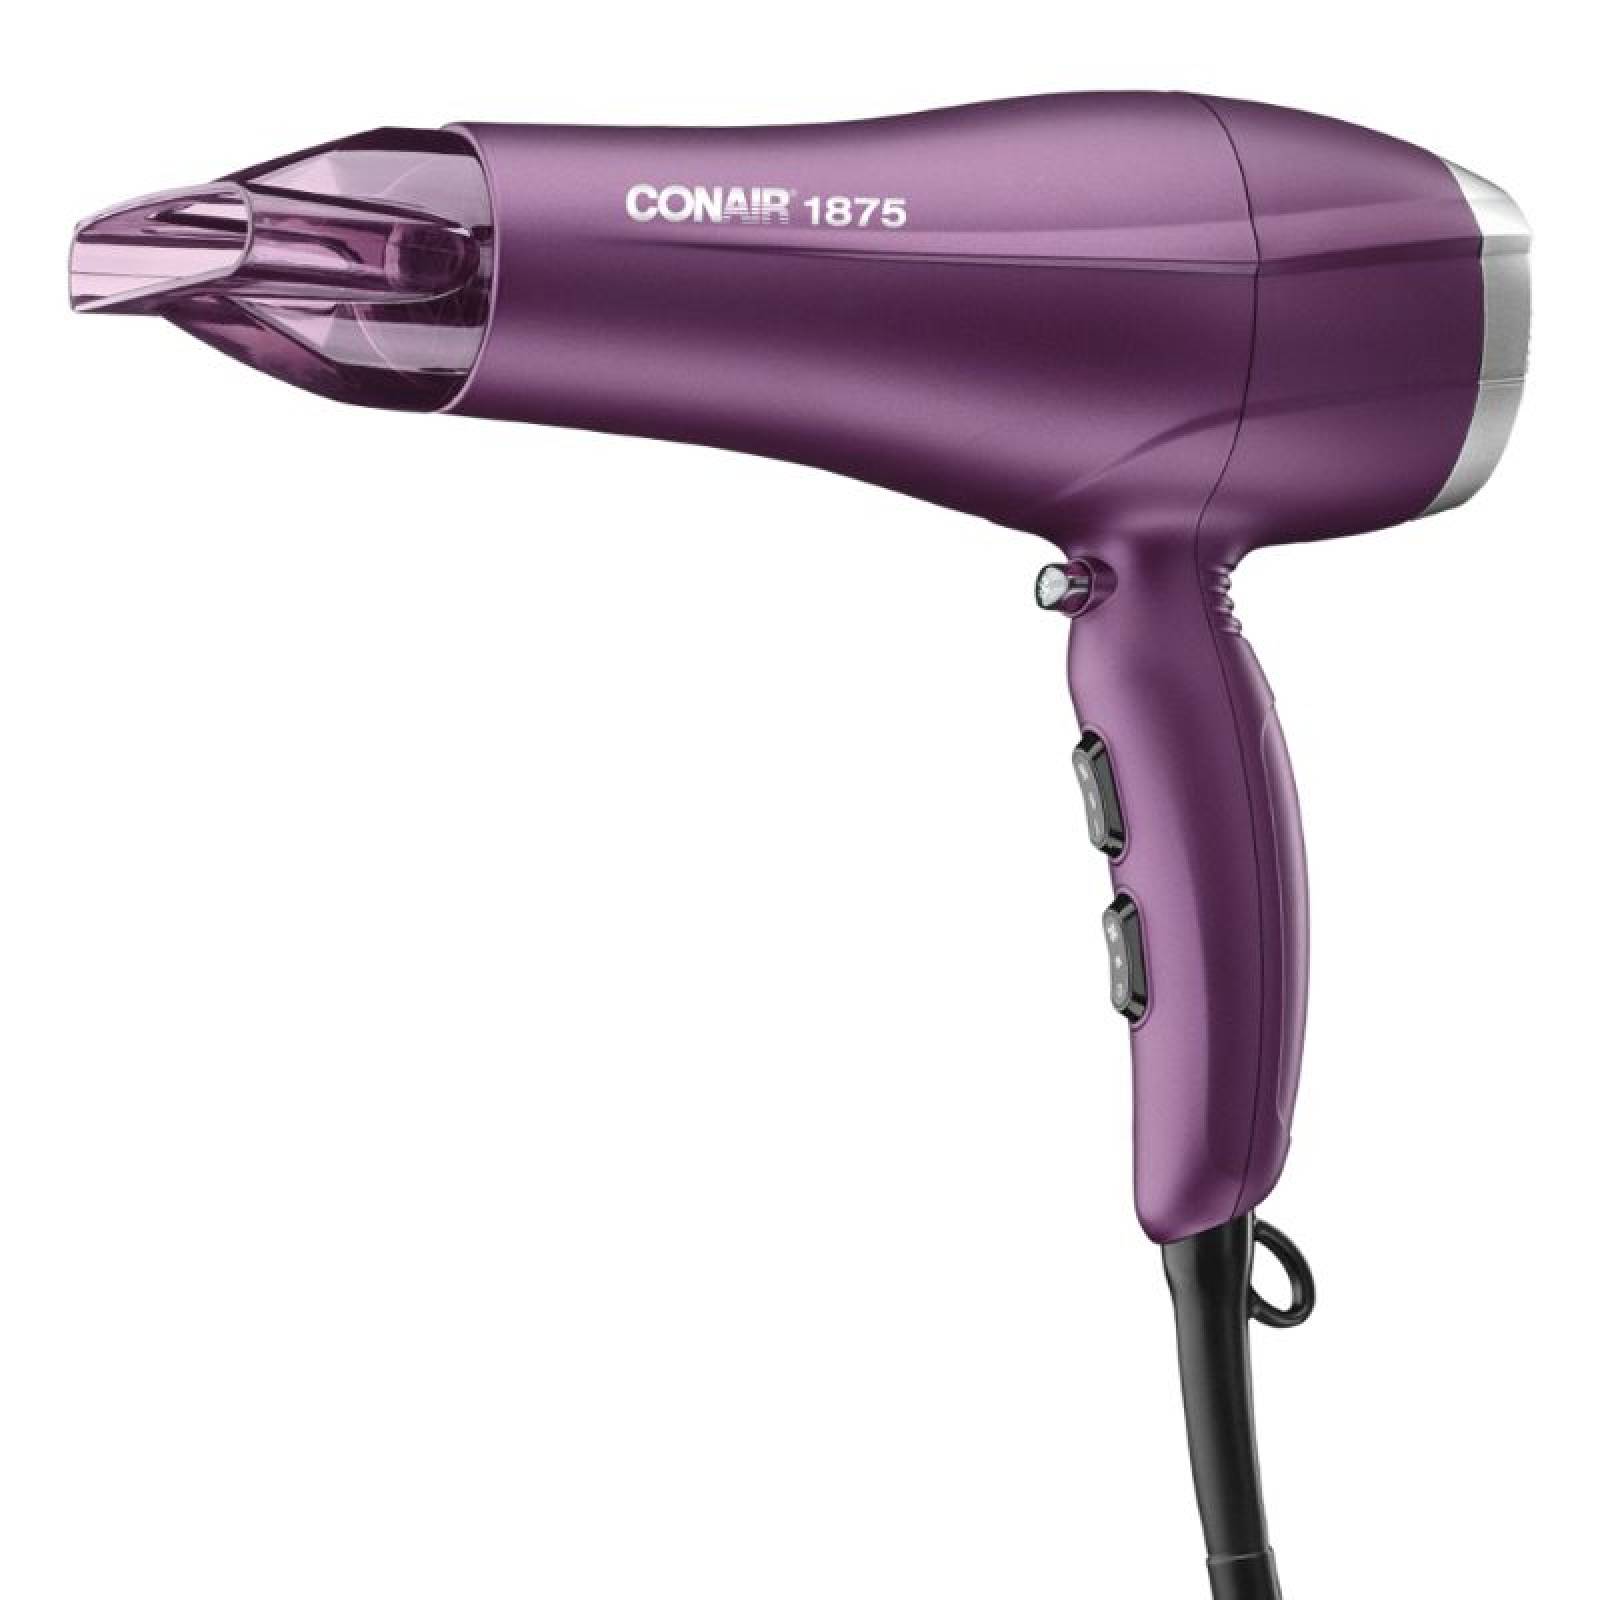 Secadora smooth ultra fast drying velvet orchid 2300 565ES MX